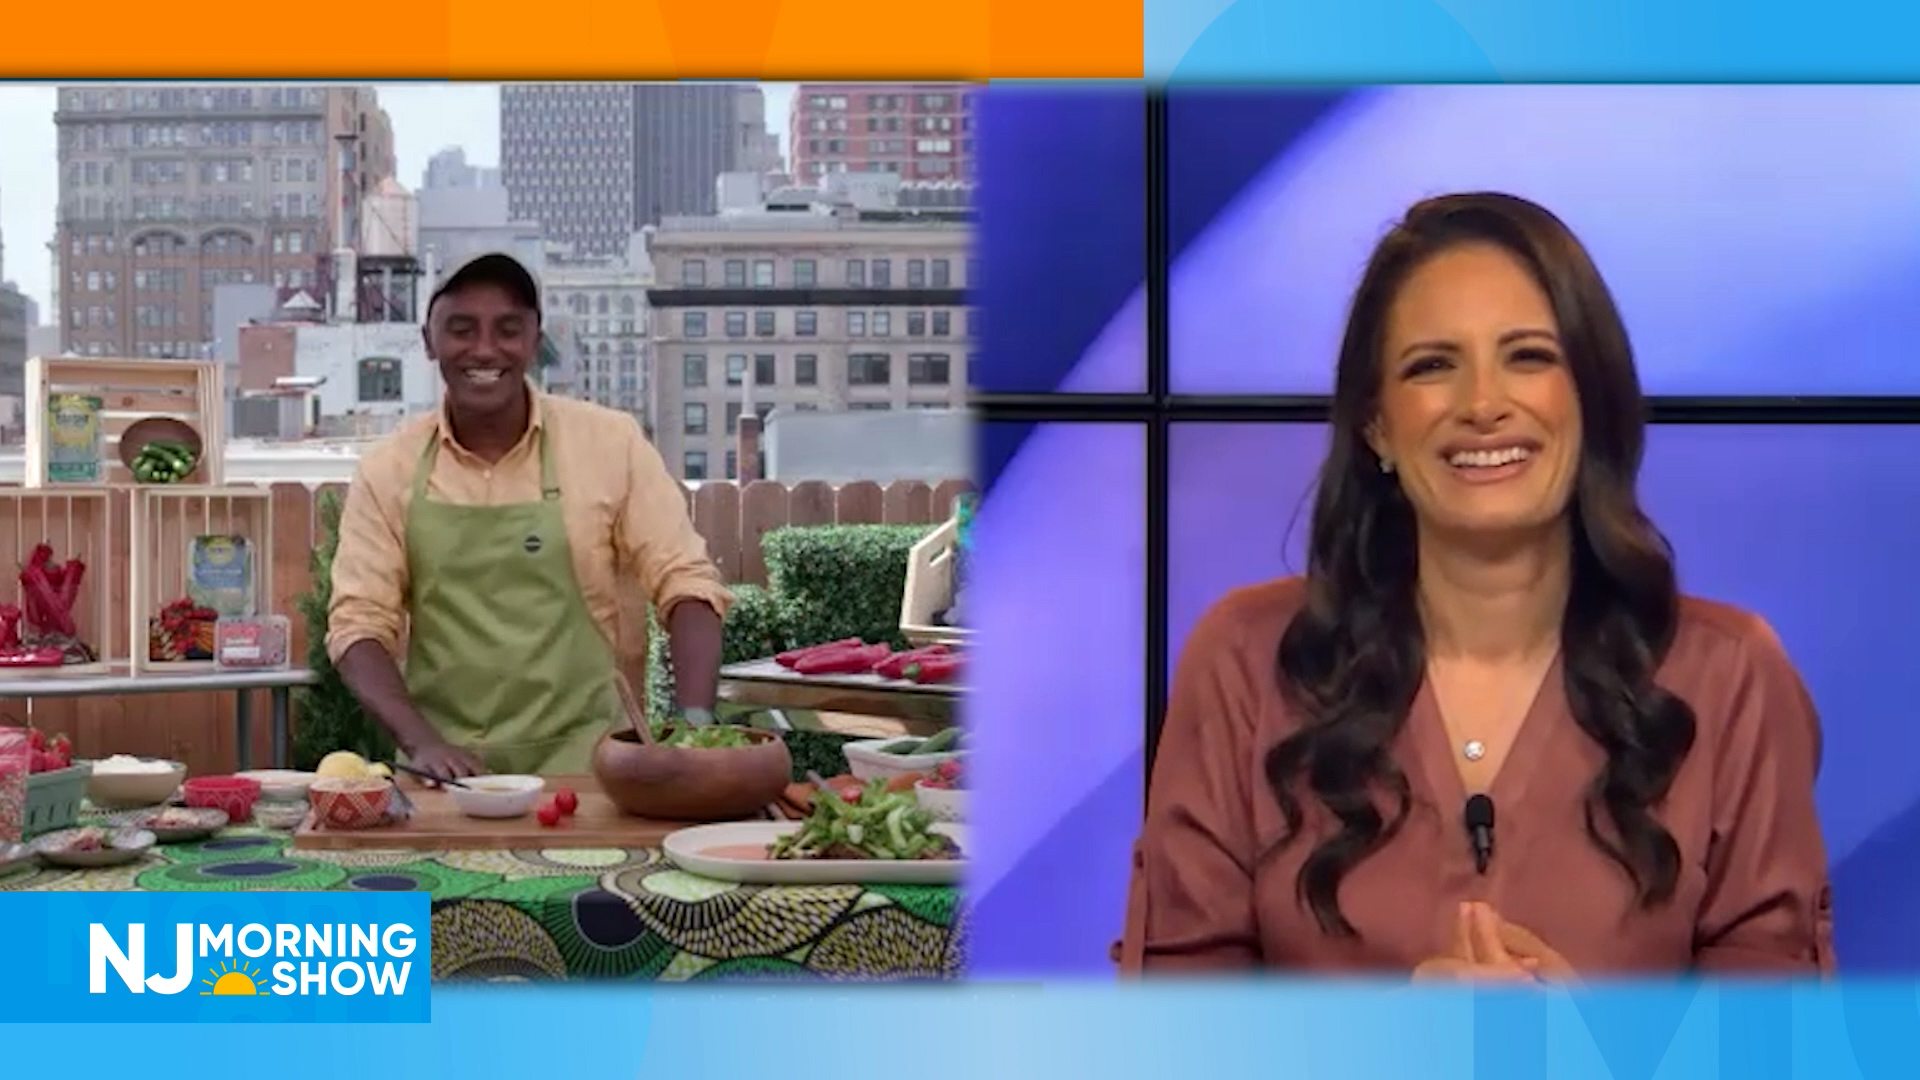 NJ Morning Show – Interview with Chef Marcus Samuelsson